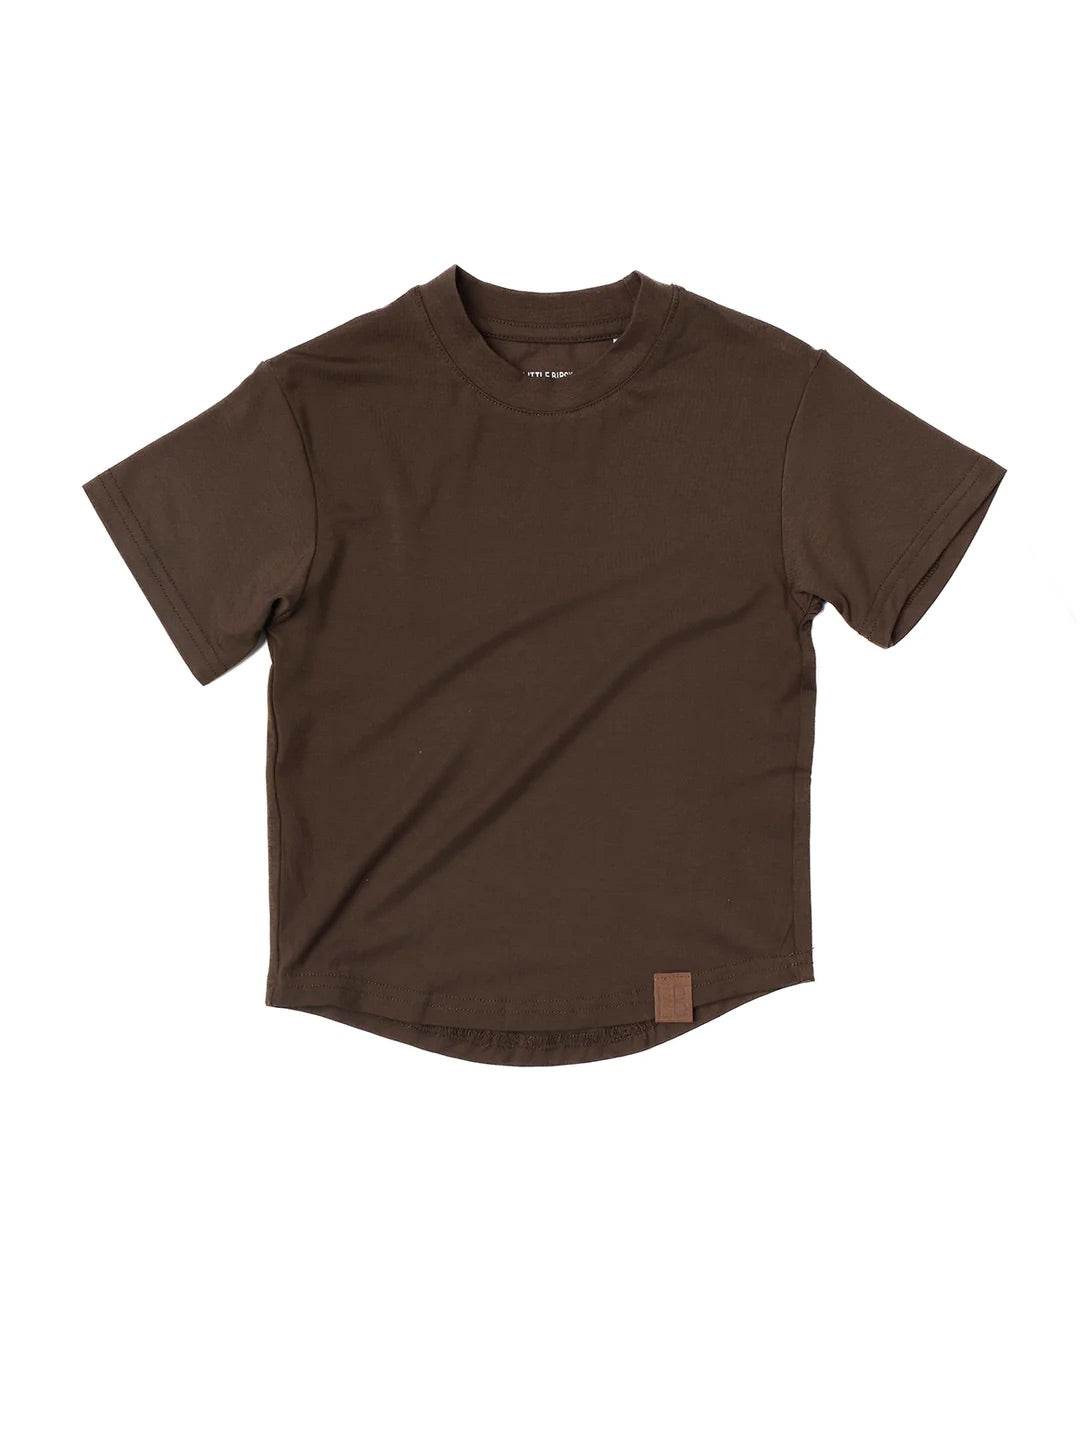 Little Bipsy / Oversized Bamboo Tee (3 Colors)